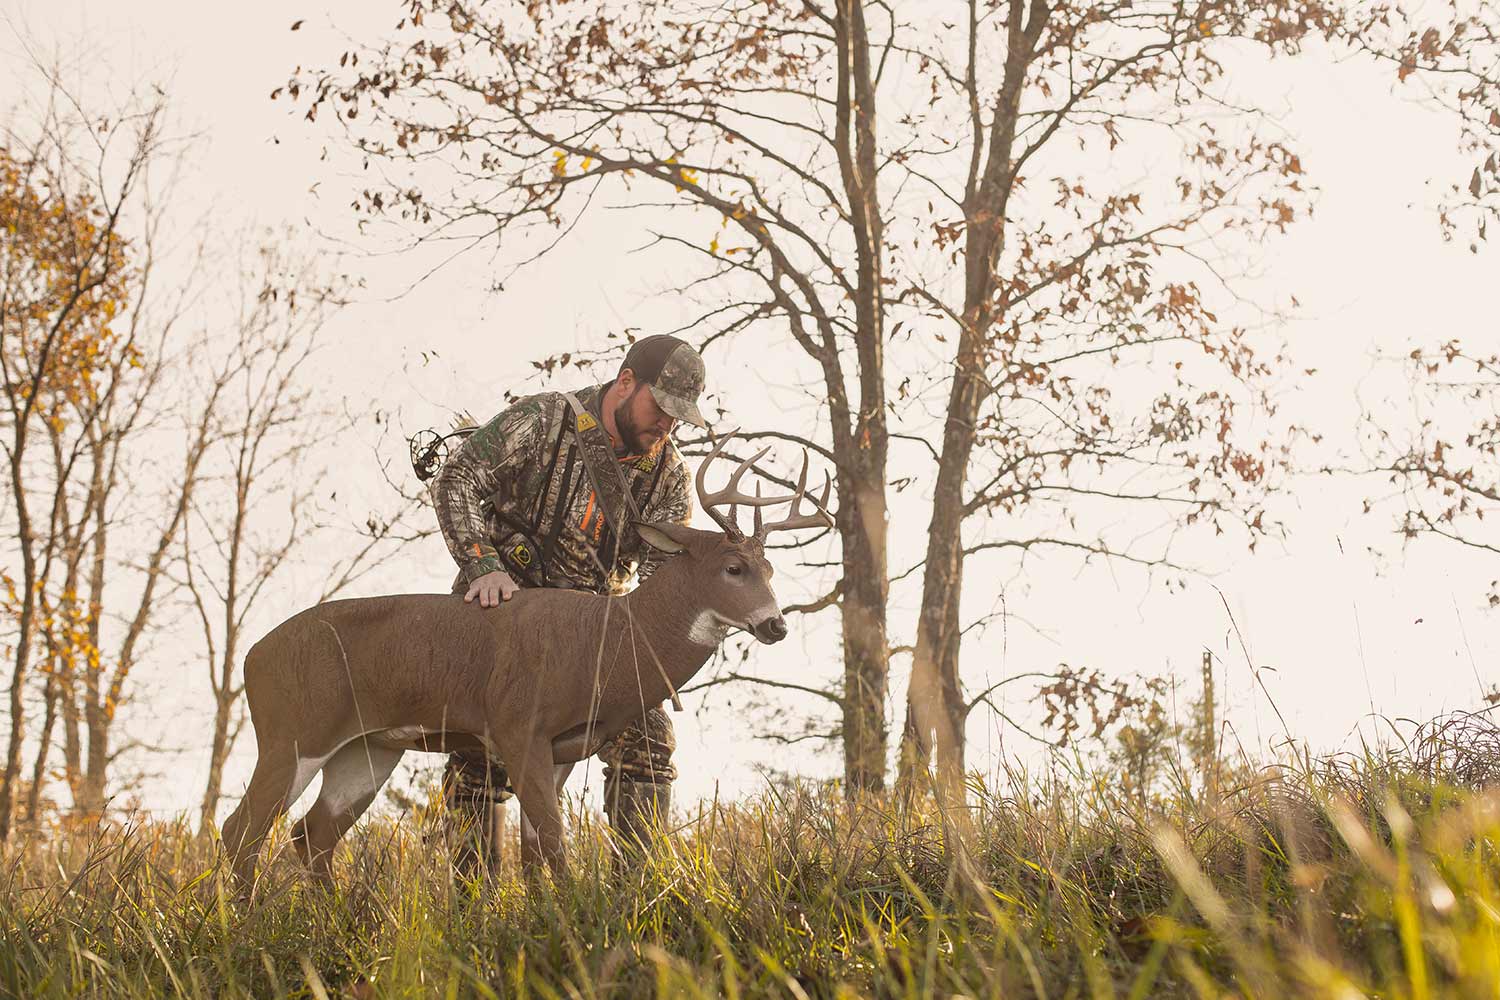 Michael Hunsucker sets up a Dave Smith deer decoy on private land in Iowa.